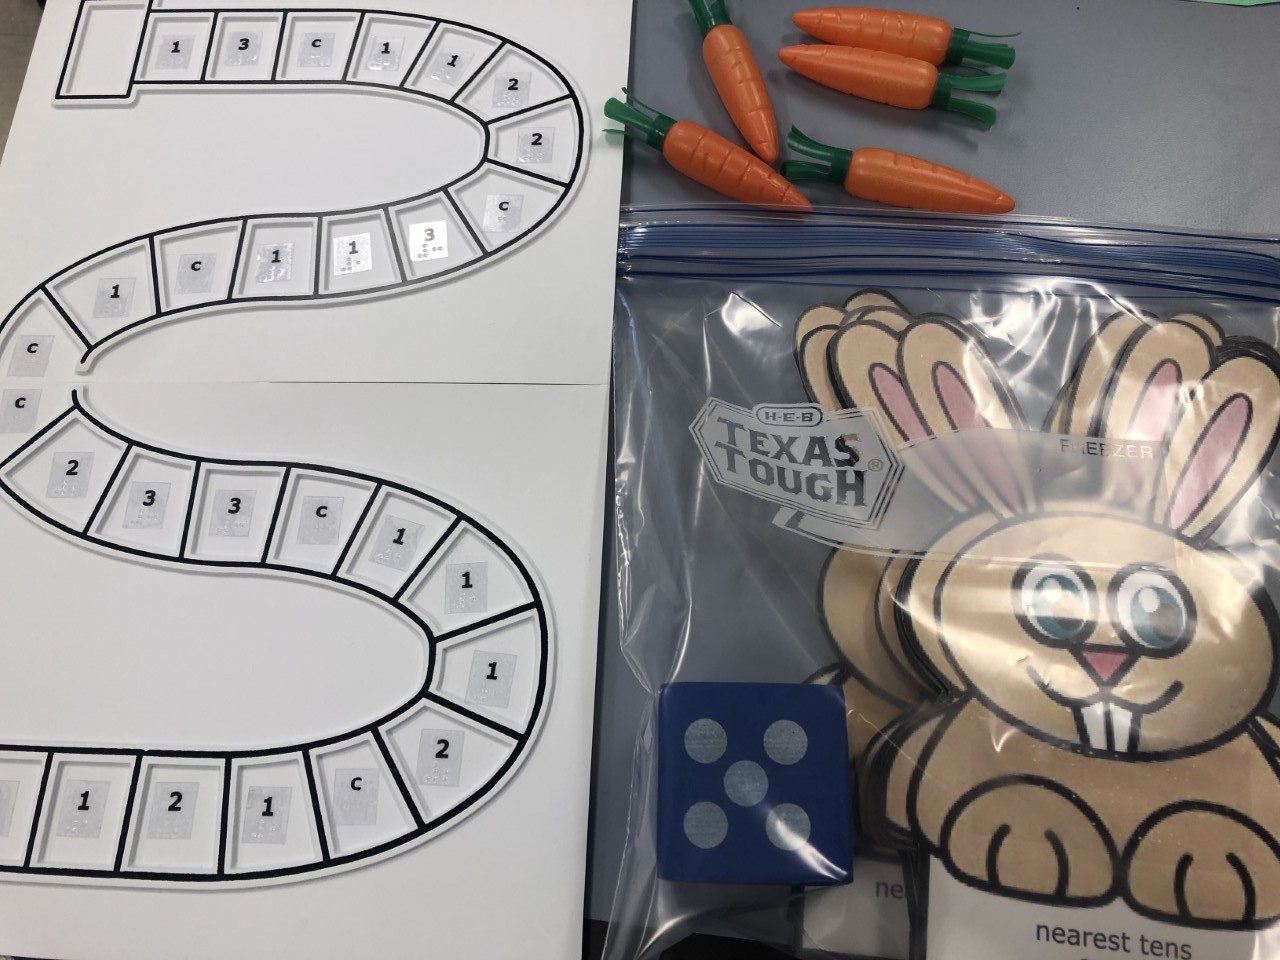 bunny cards, game board, and carrots